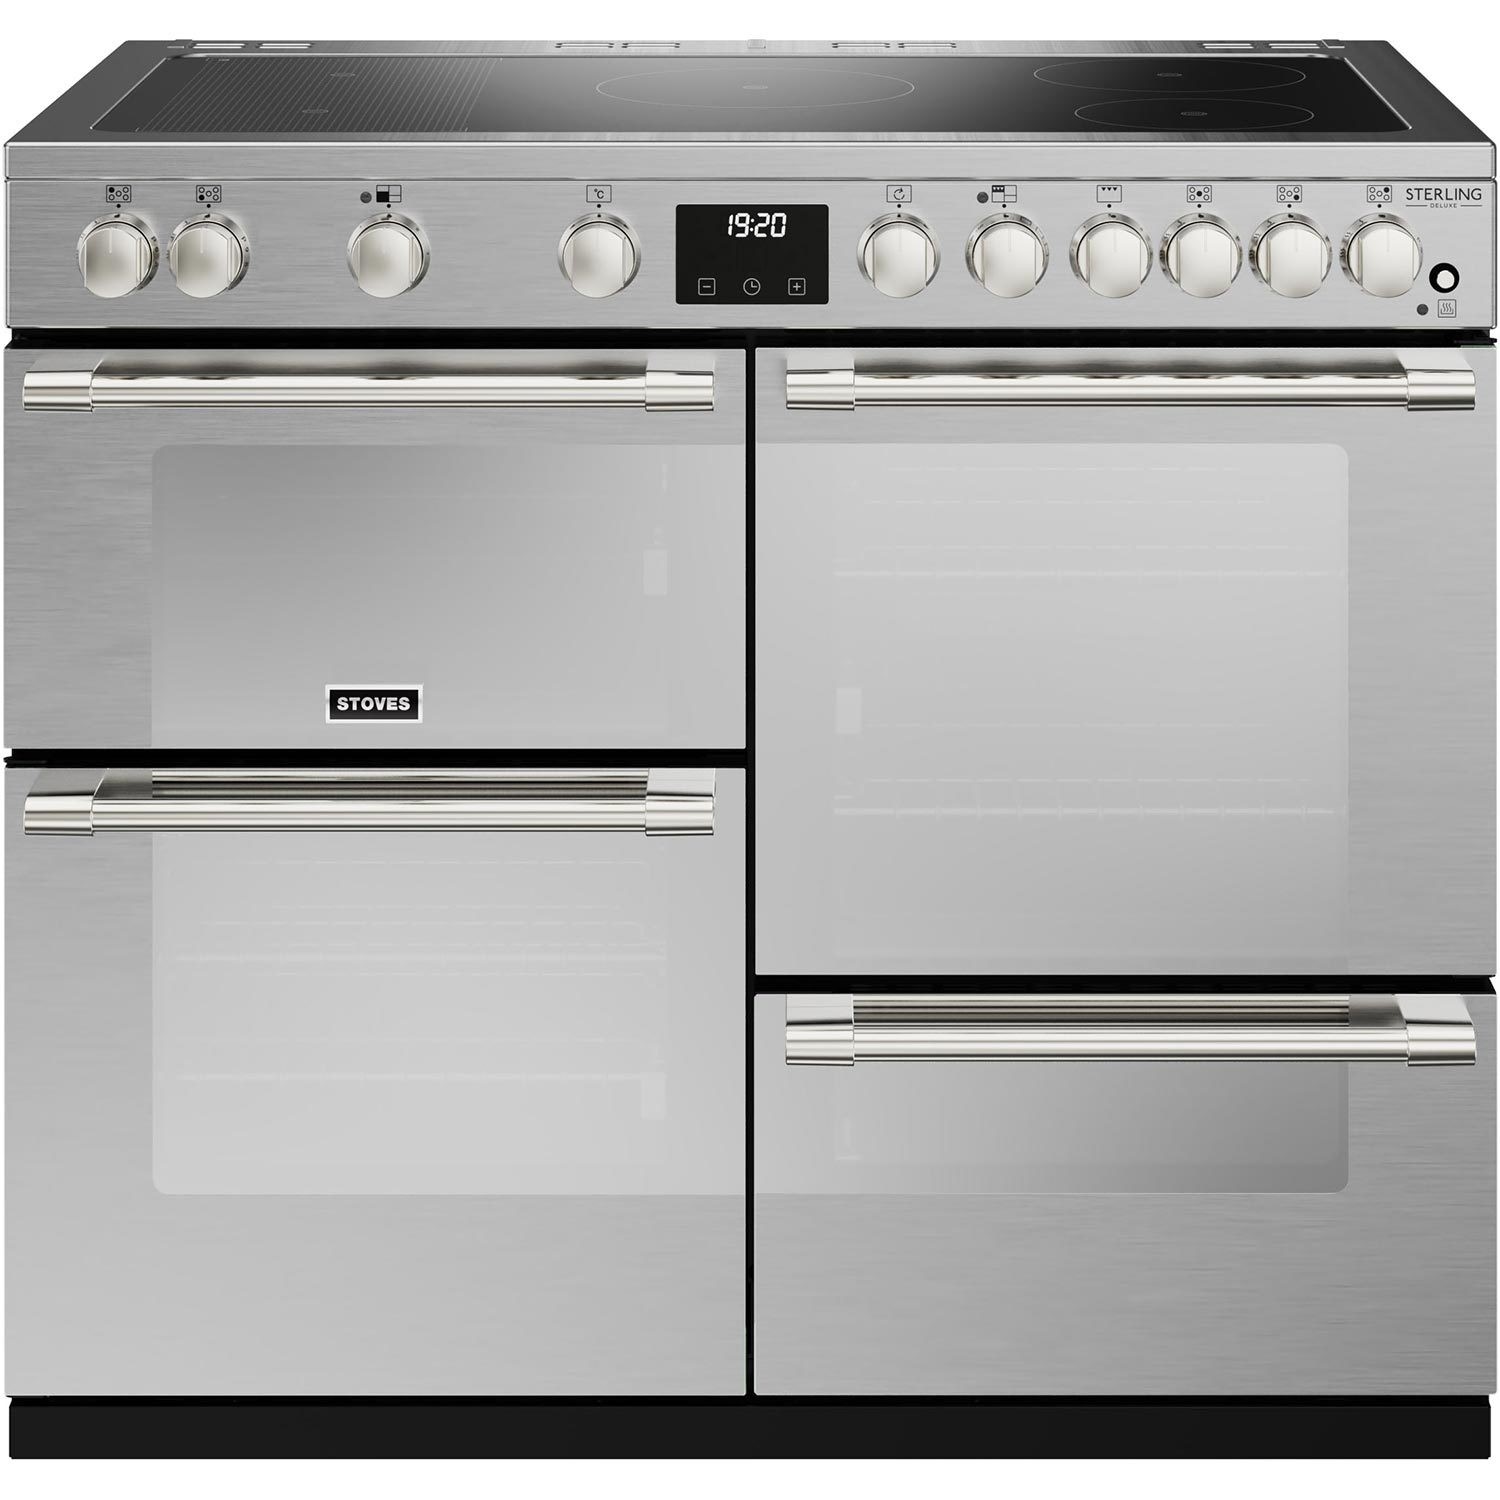 Photos - Other for Computer Stoves Sterling Deluxe D1000Ei RTY 100cm Electric Range Cooker - Stain 444 